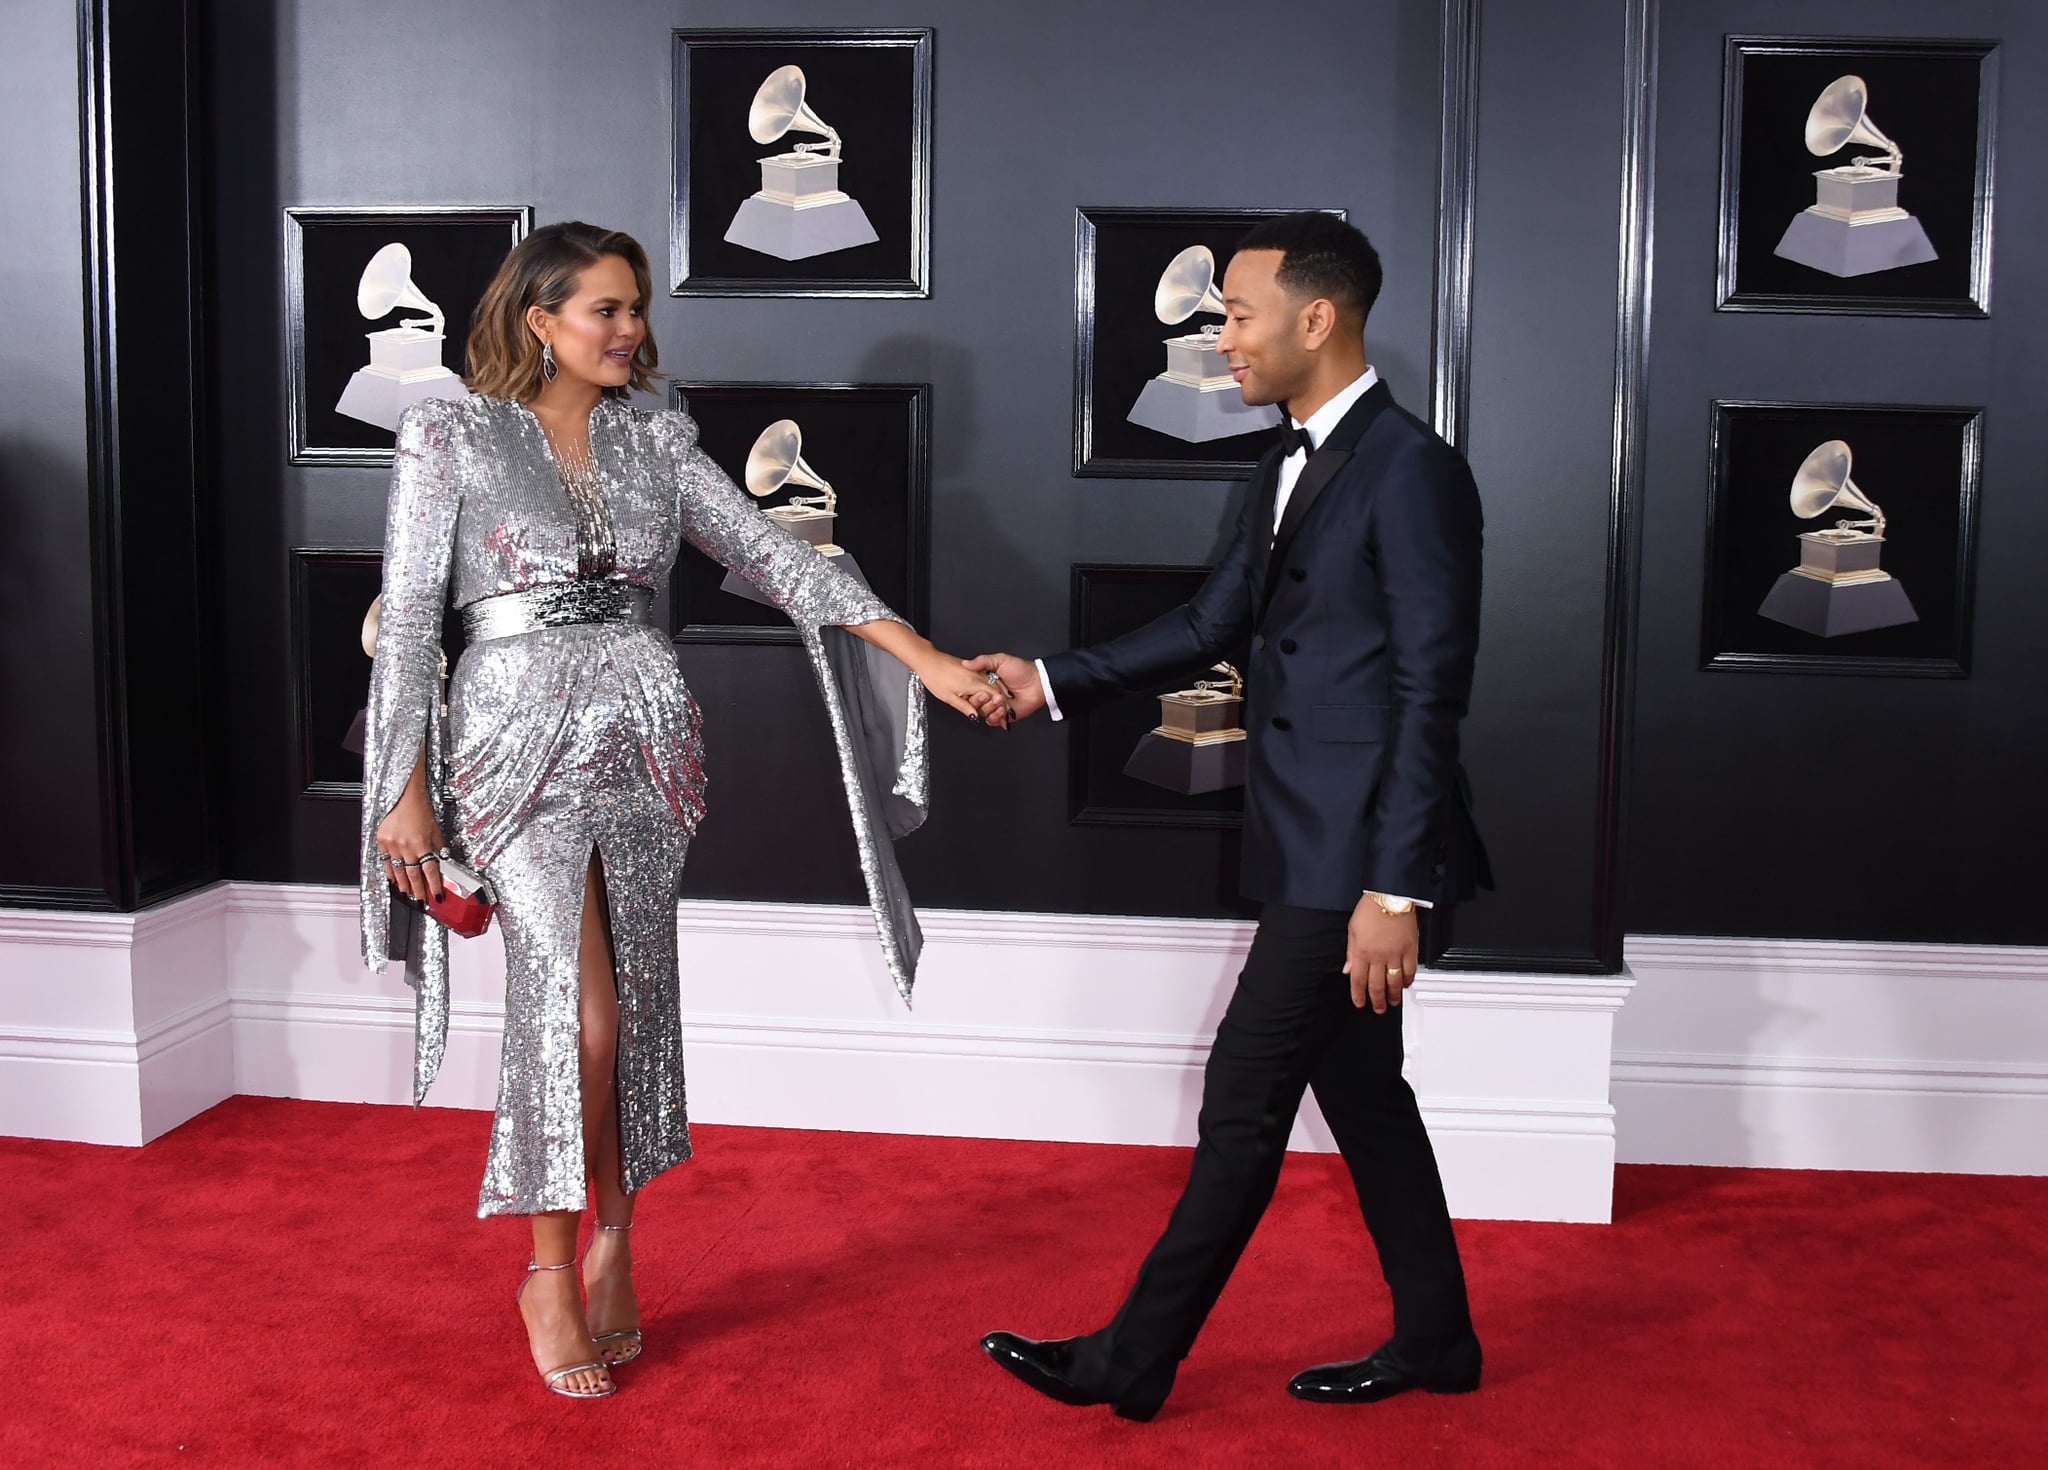 In 2018, Chrissy Teigen and John Legend arrived at the ceremony hand in hand.